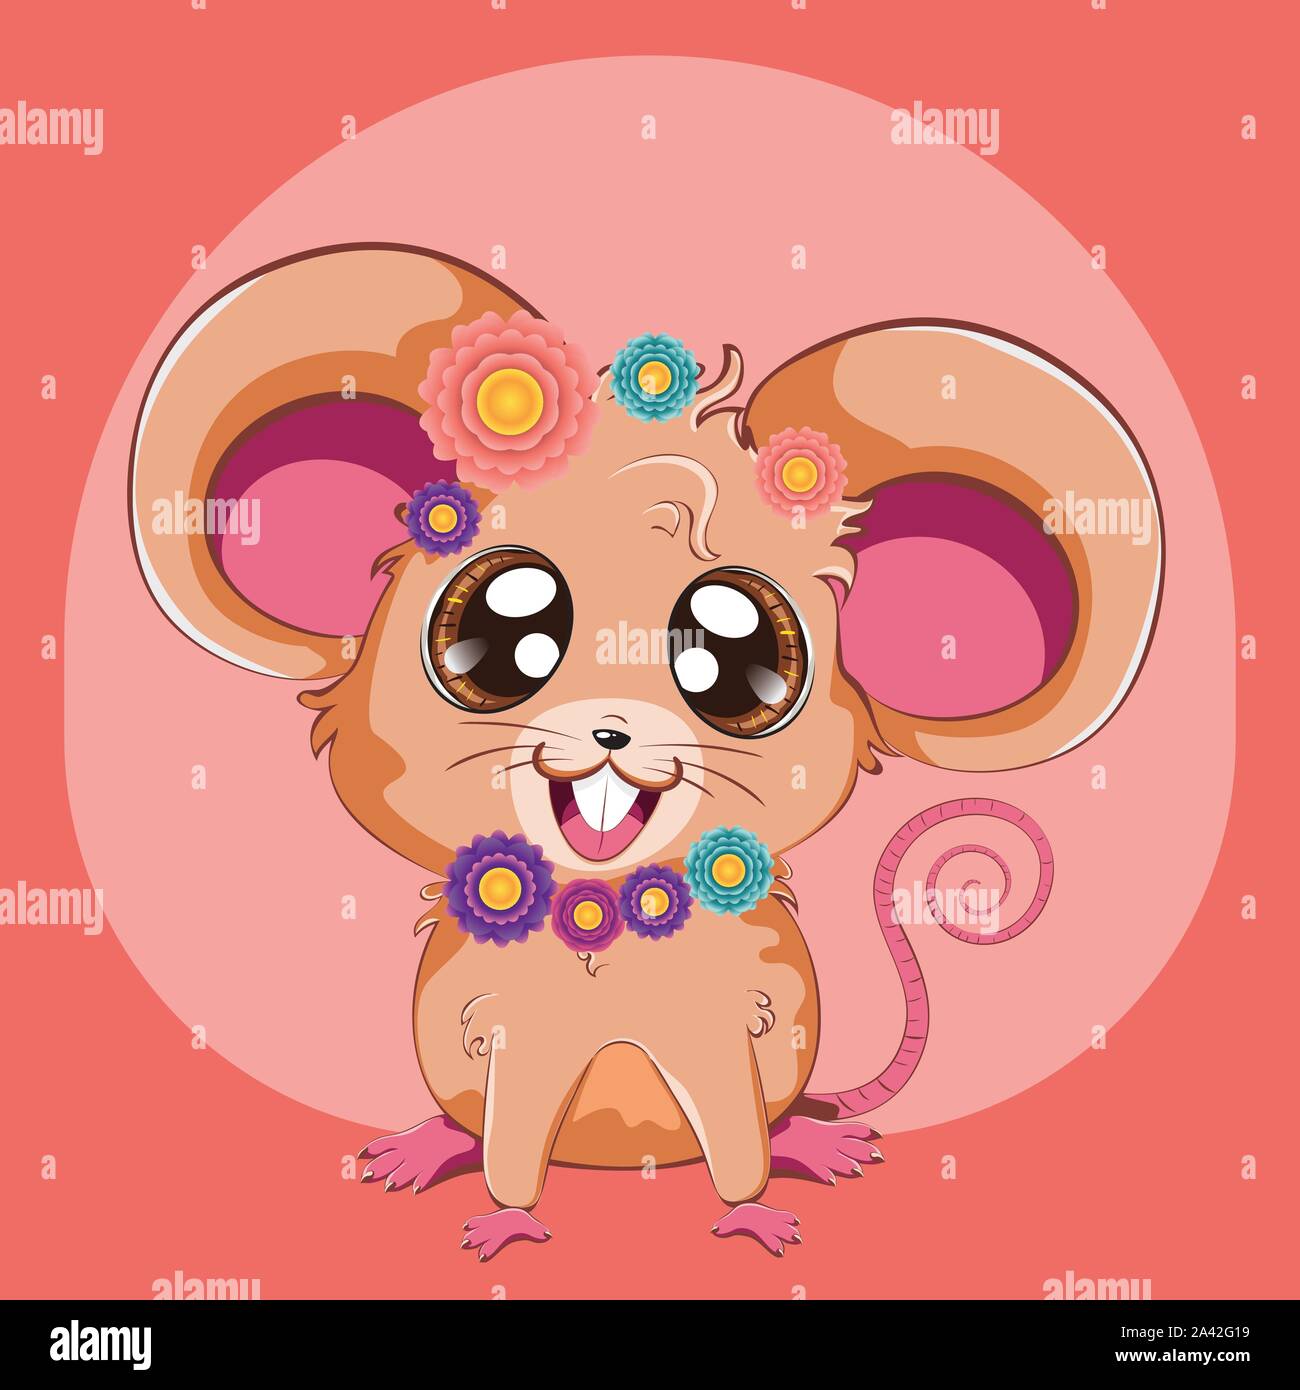 Anime Mouse Stock Illustrations – 992 Anime Mouse Stock Illustrations,  Vectors & Clipart - Dreamstime